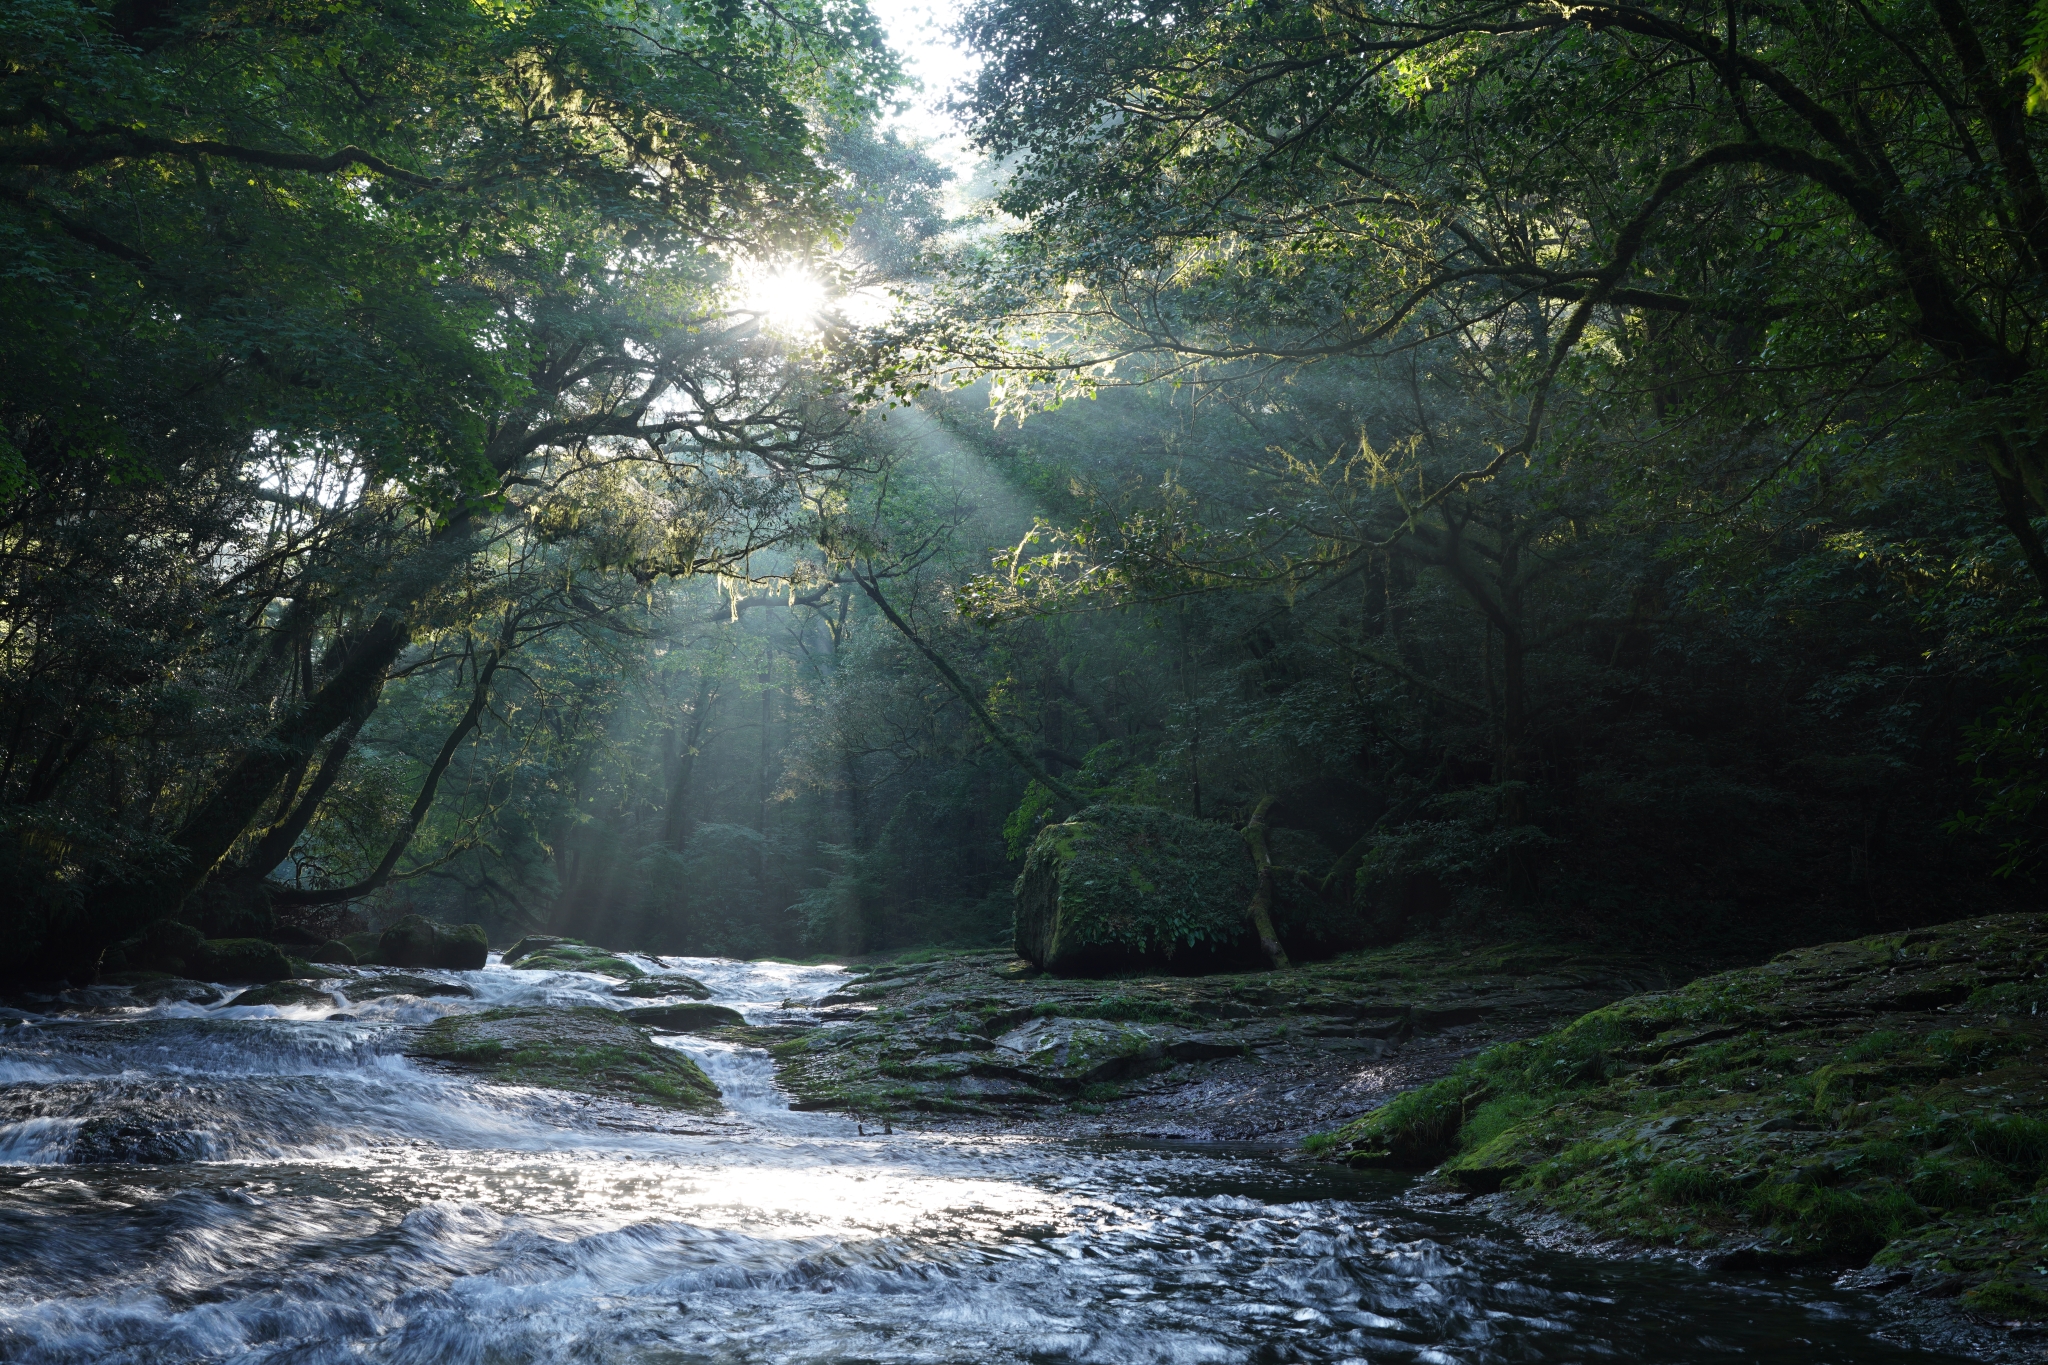 River running through forest with rays of sunlight breaking through the green canopy